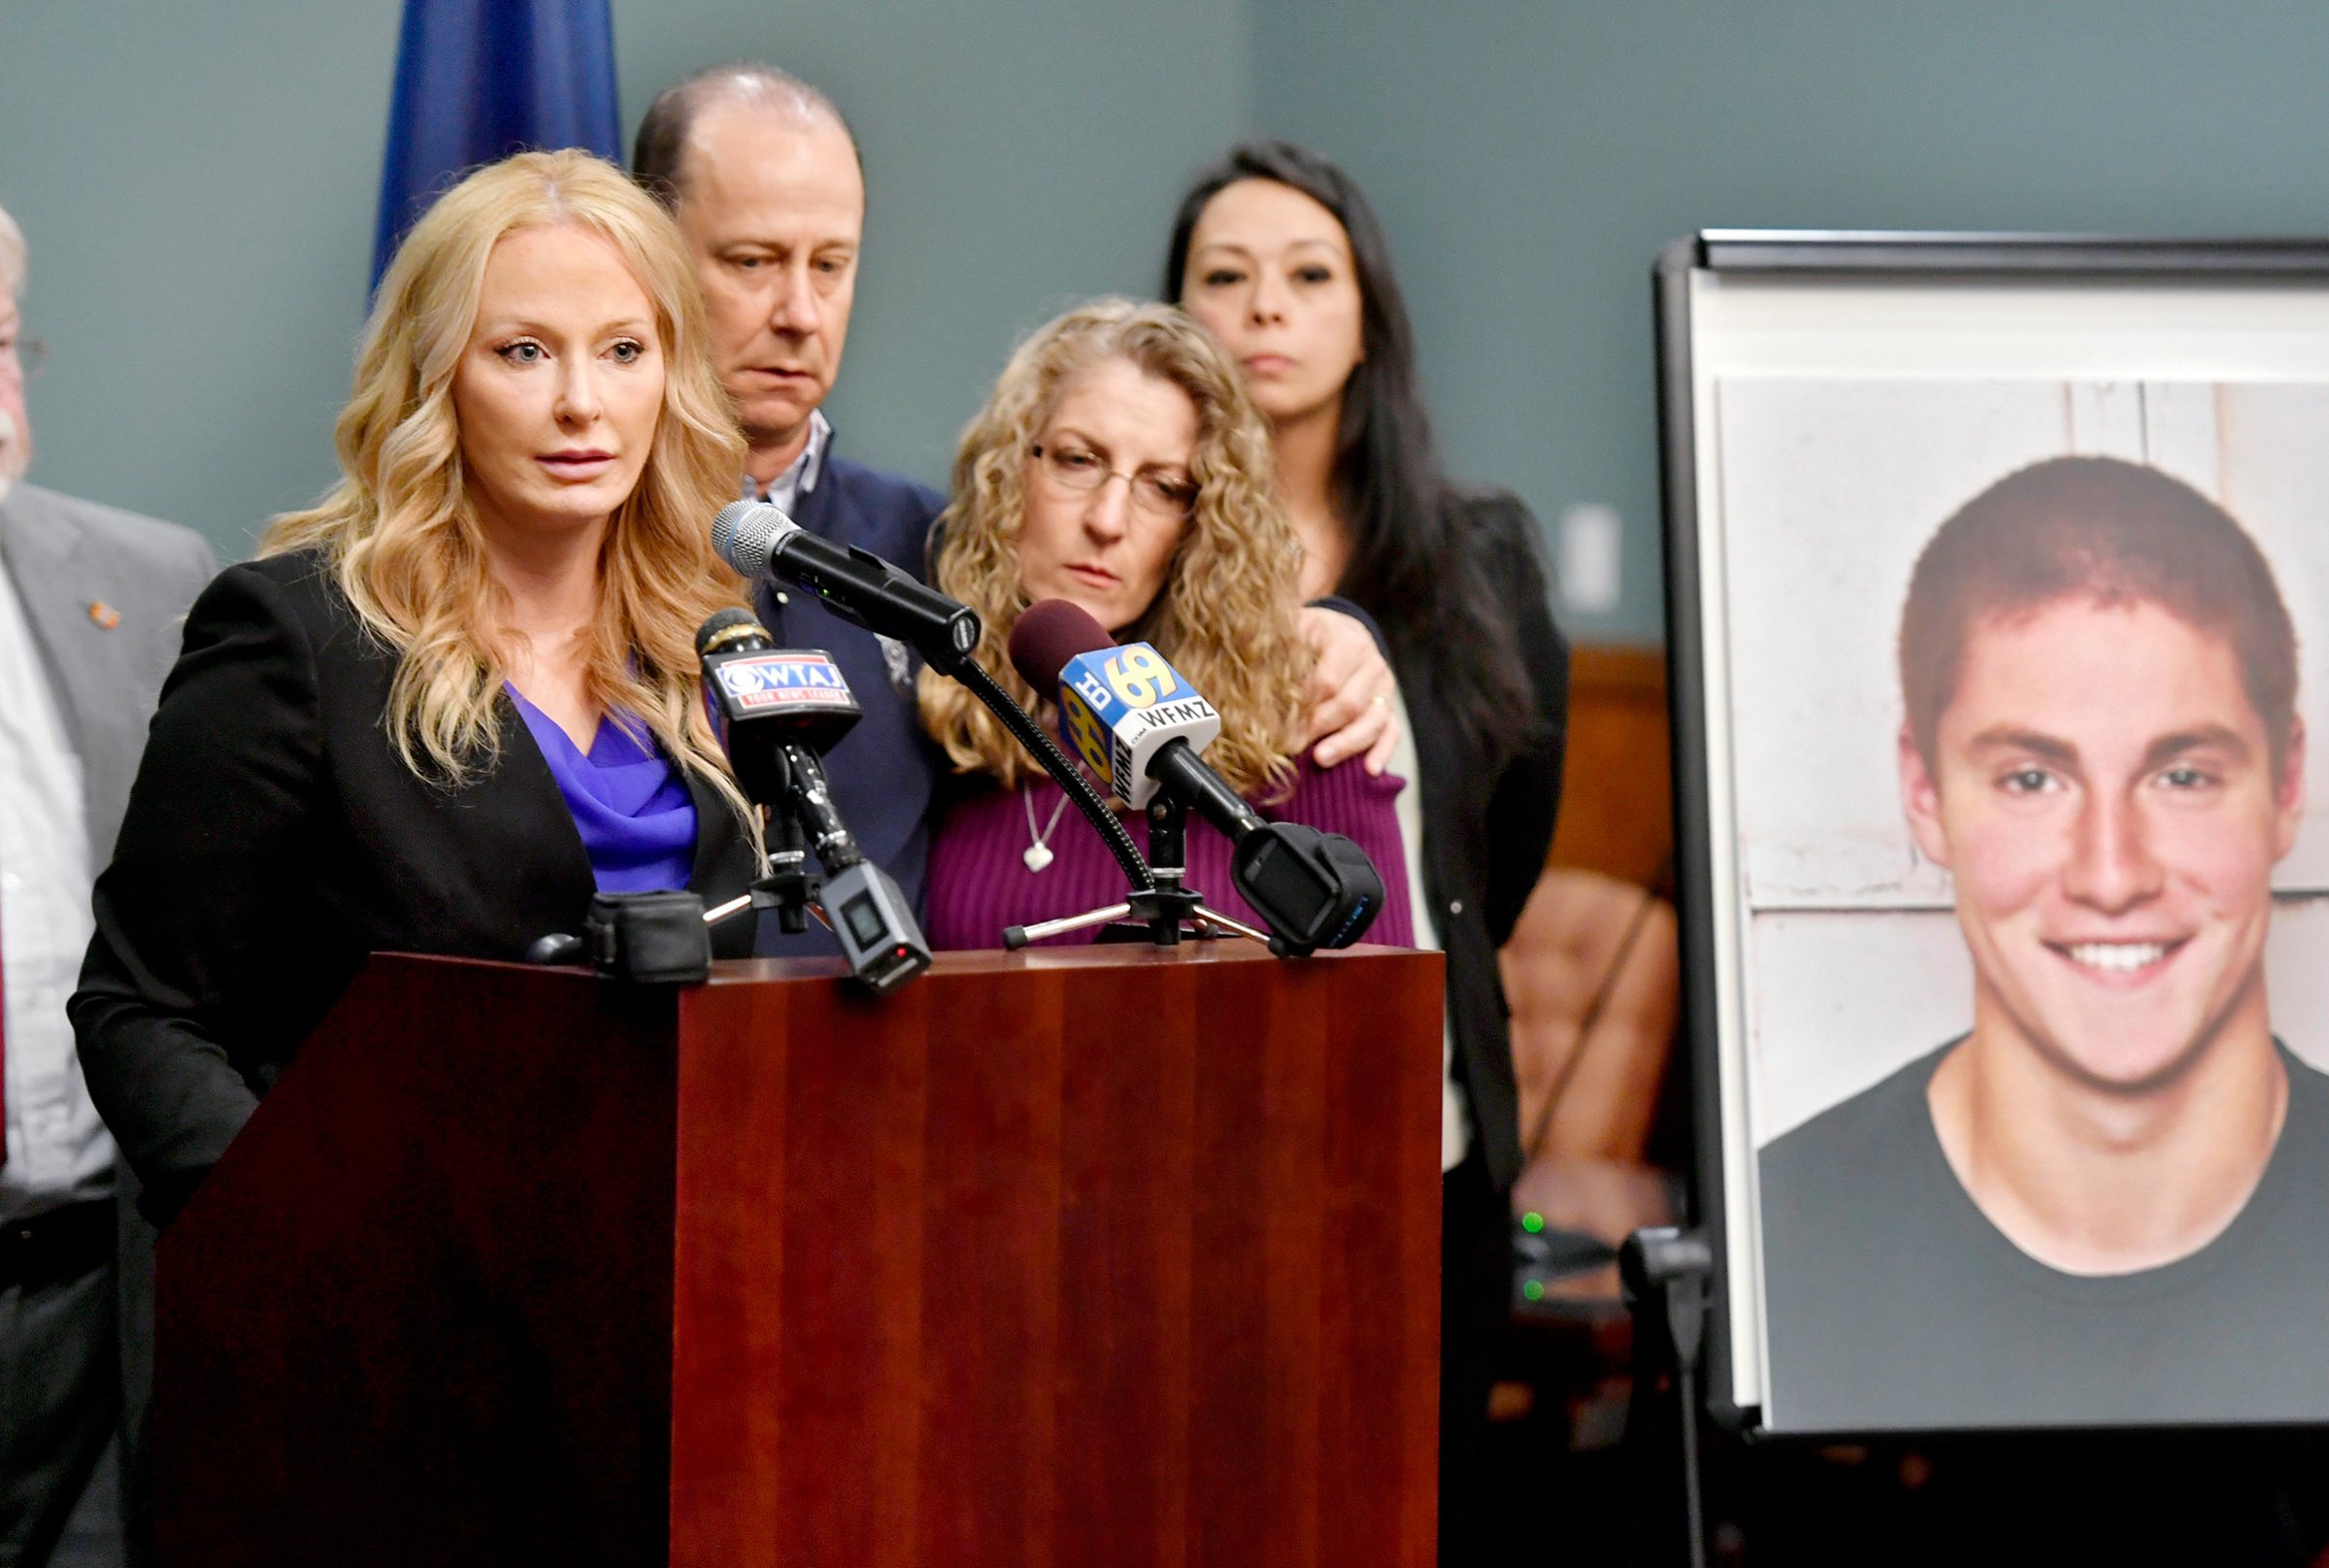 Centre County District Attorney Stacy Parks Miller, left, stands with Tim Piazza’s parents on May 5 to announce the results of an investigation into his death